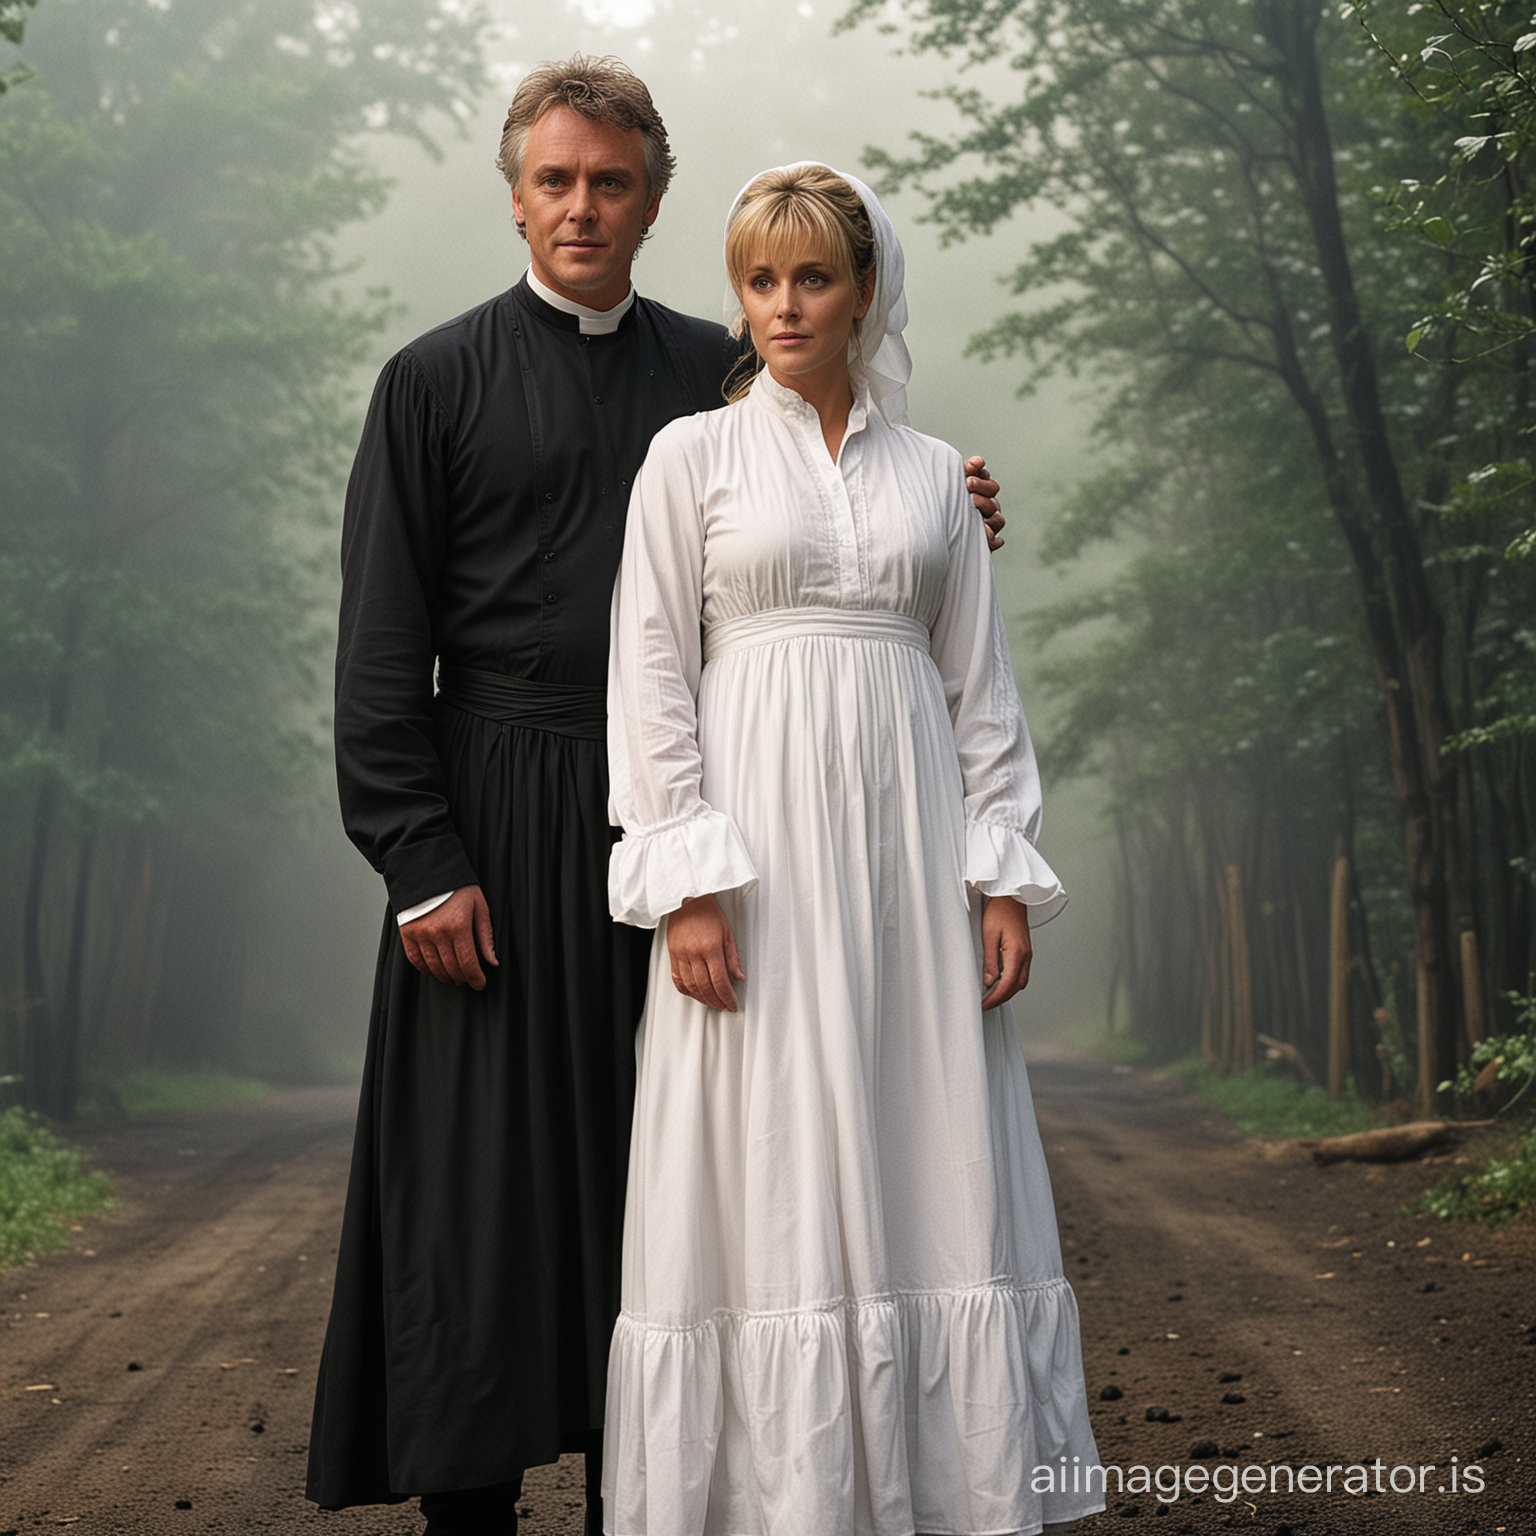 Amanda Tapping as Samantha Carter from SG1 , dressed and head covered as a prim and proper amish wife , in a billowing black floor-length traditional dress with a white apron curtseying demurely in front of her 70 years old husband
